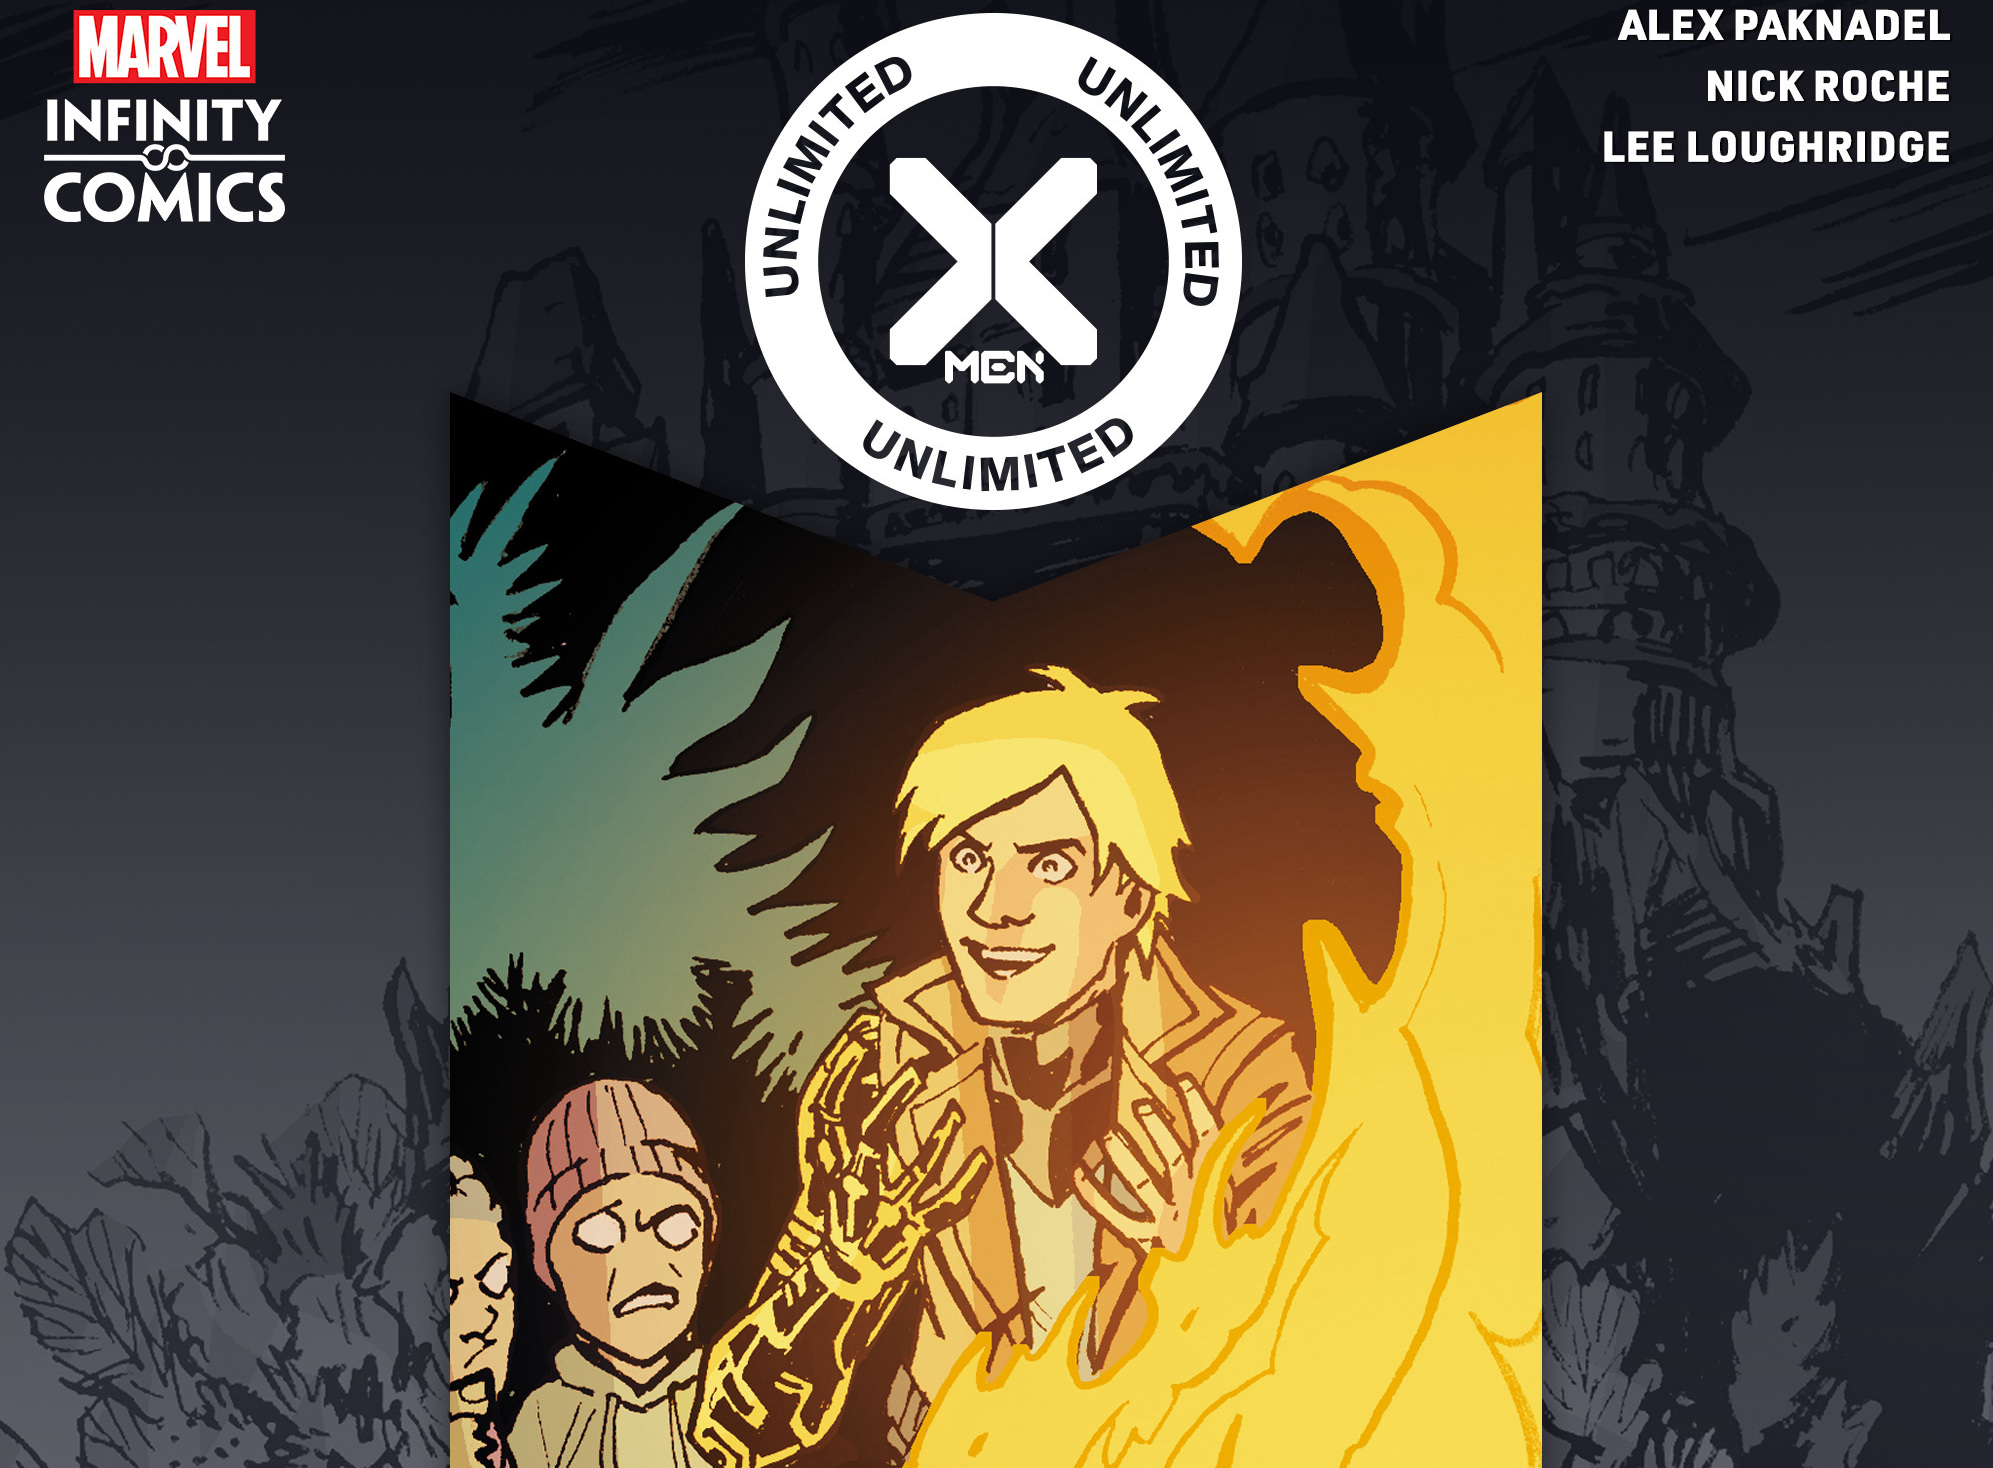 'X-Men Unlimited' #59 is a Halloween special only on Marvel Unlimited